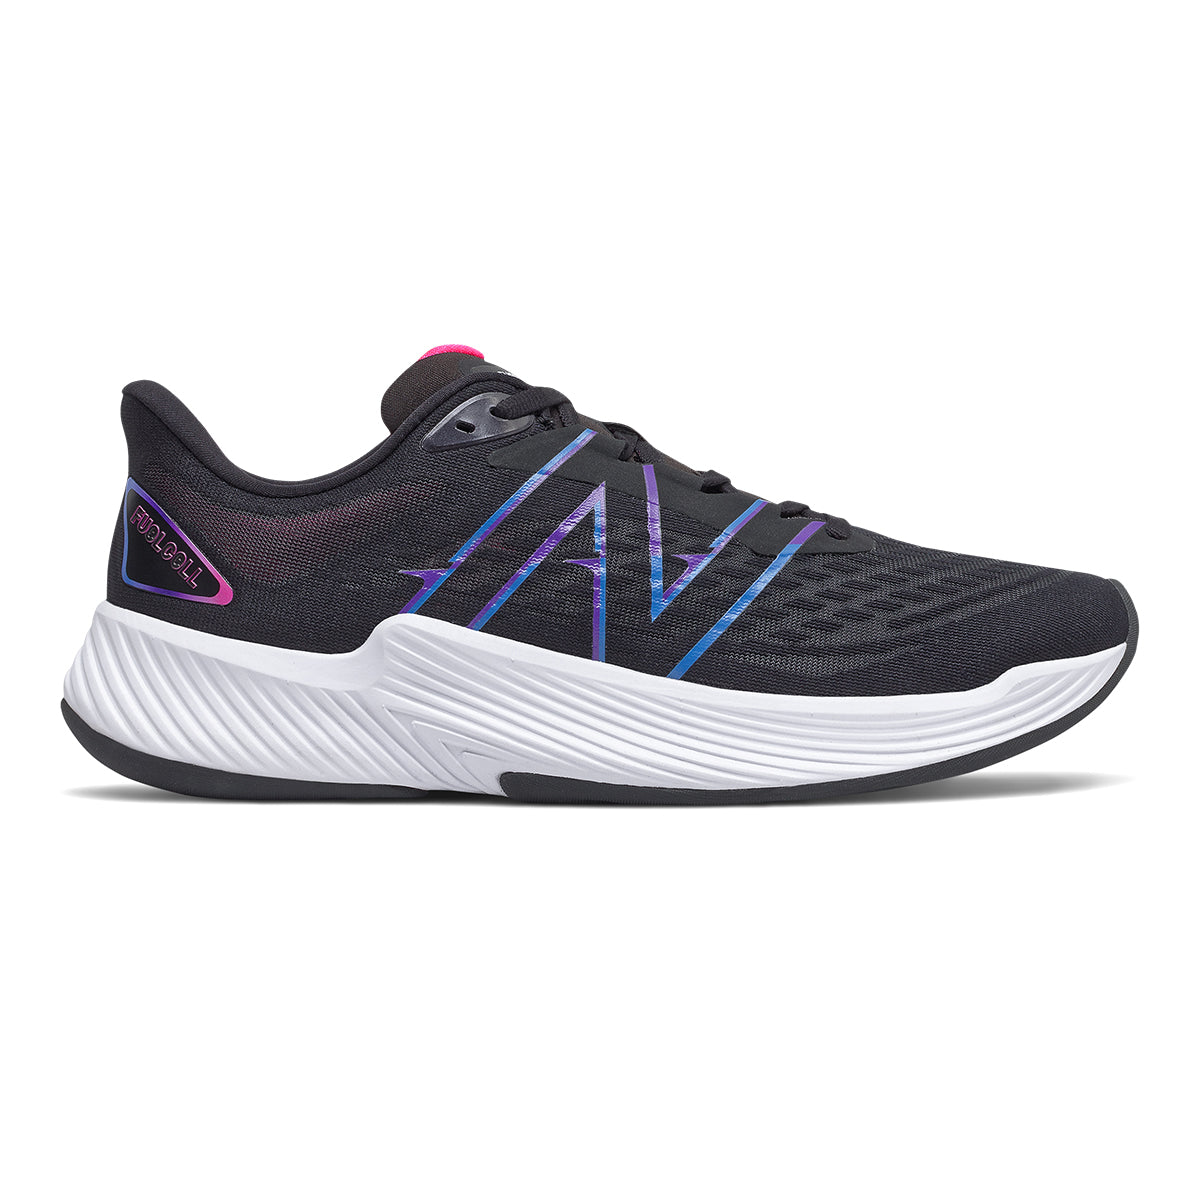 New Balance FuelCell Prism v2 Men's running shoes